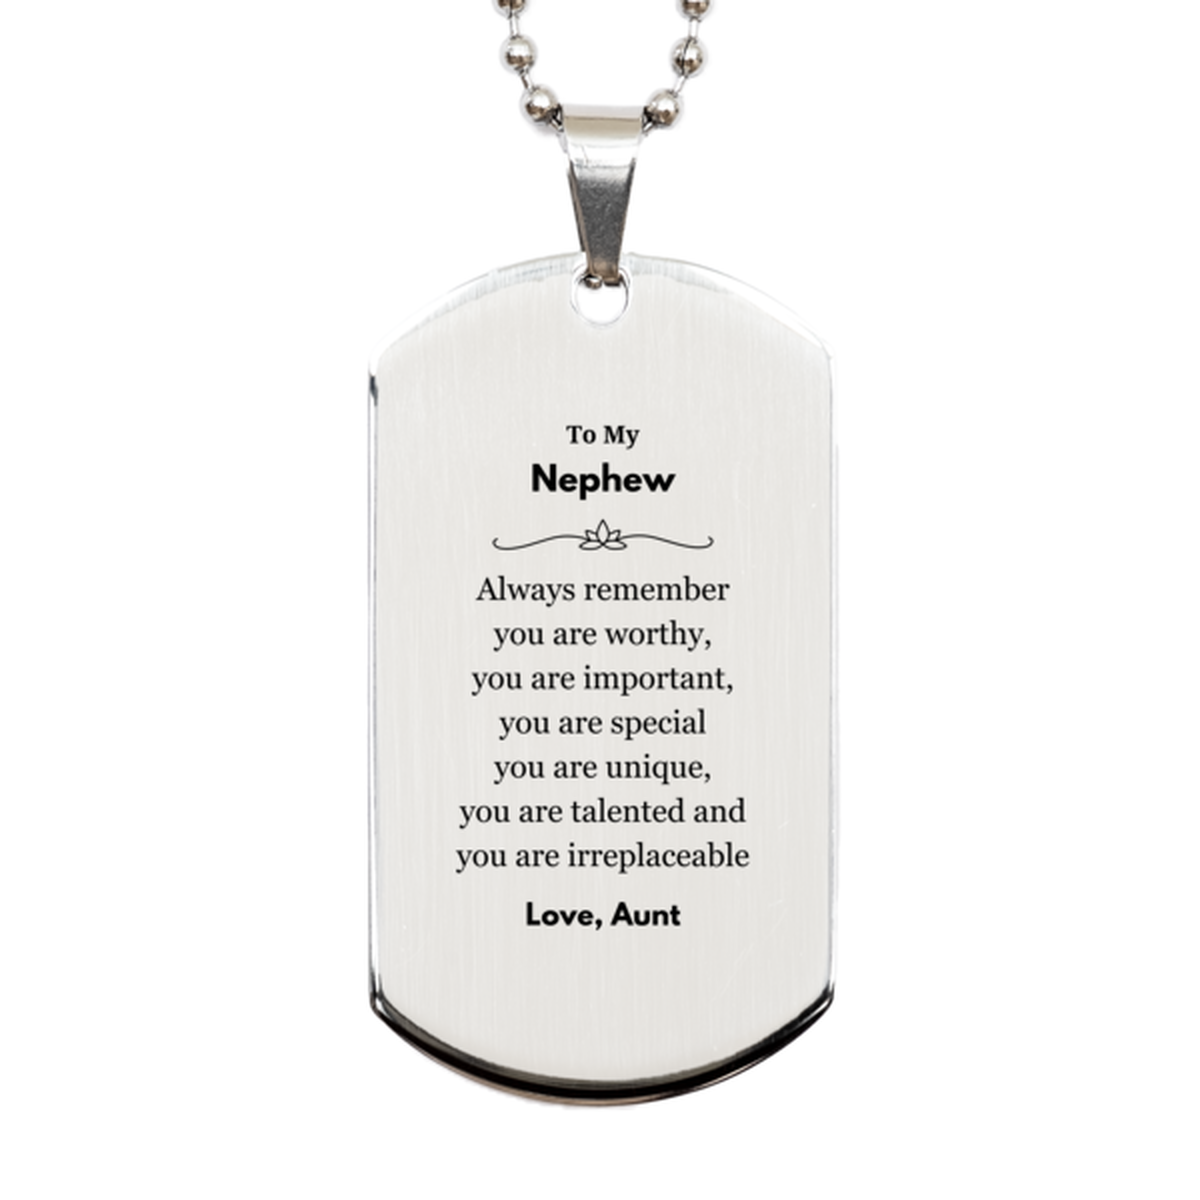 Nephew Birthday Gifts from Aunt, Inspirational Silver Dog Tag for Nephew Christmas Graduation Gifts for Nephew Always remember you are worthy, you are important. Love, Aunt